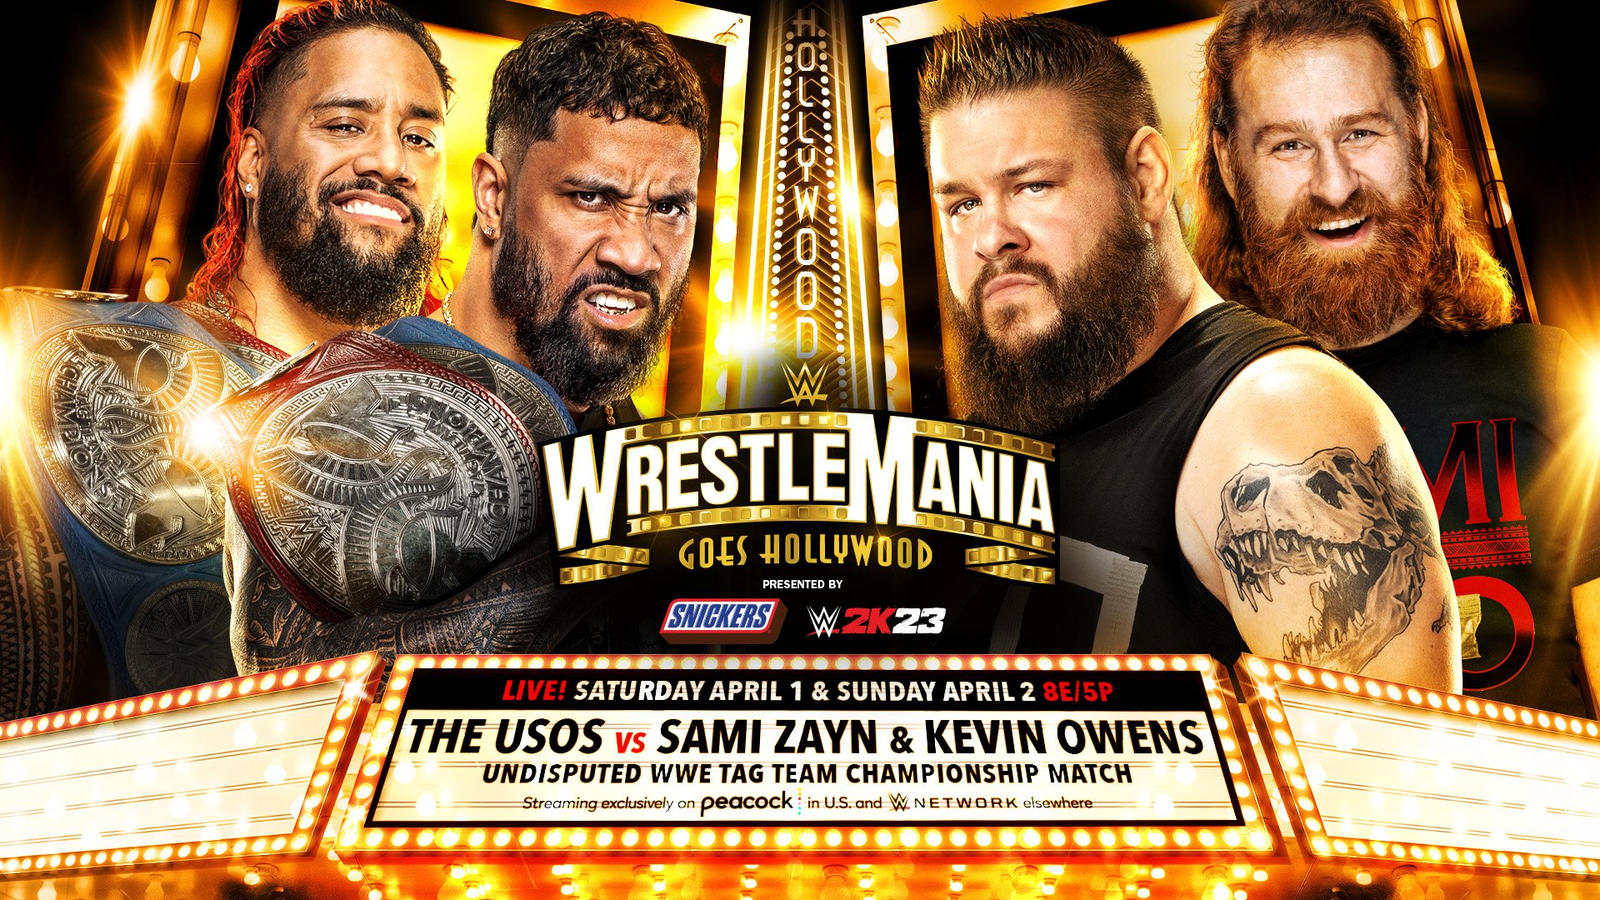 PREDICTING The Card For WWE WrestleMania 40 Night One 